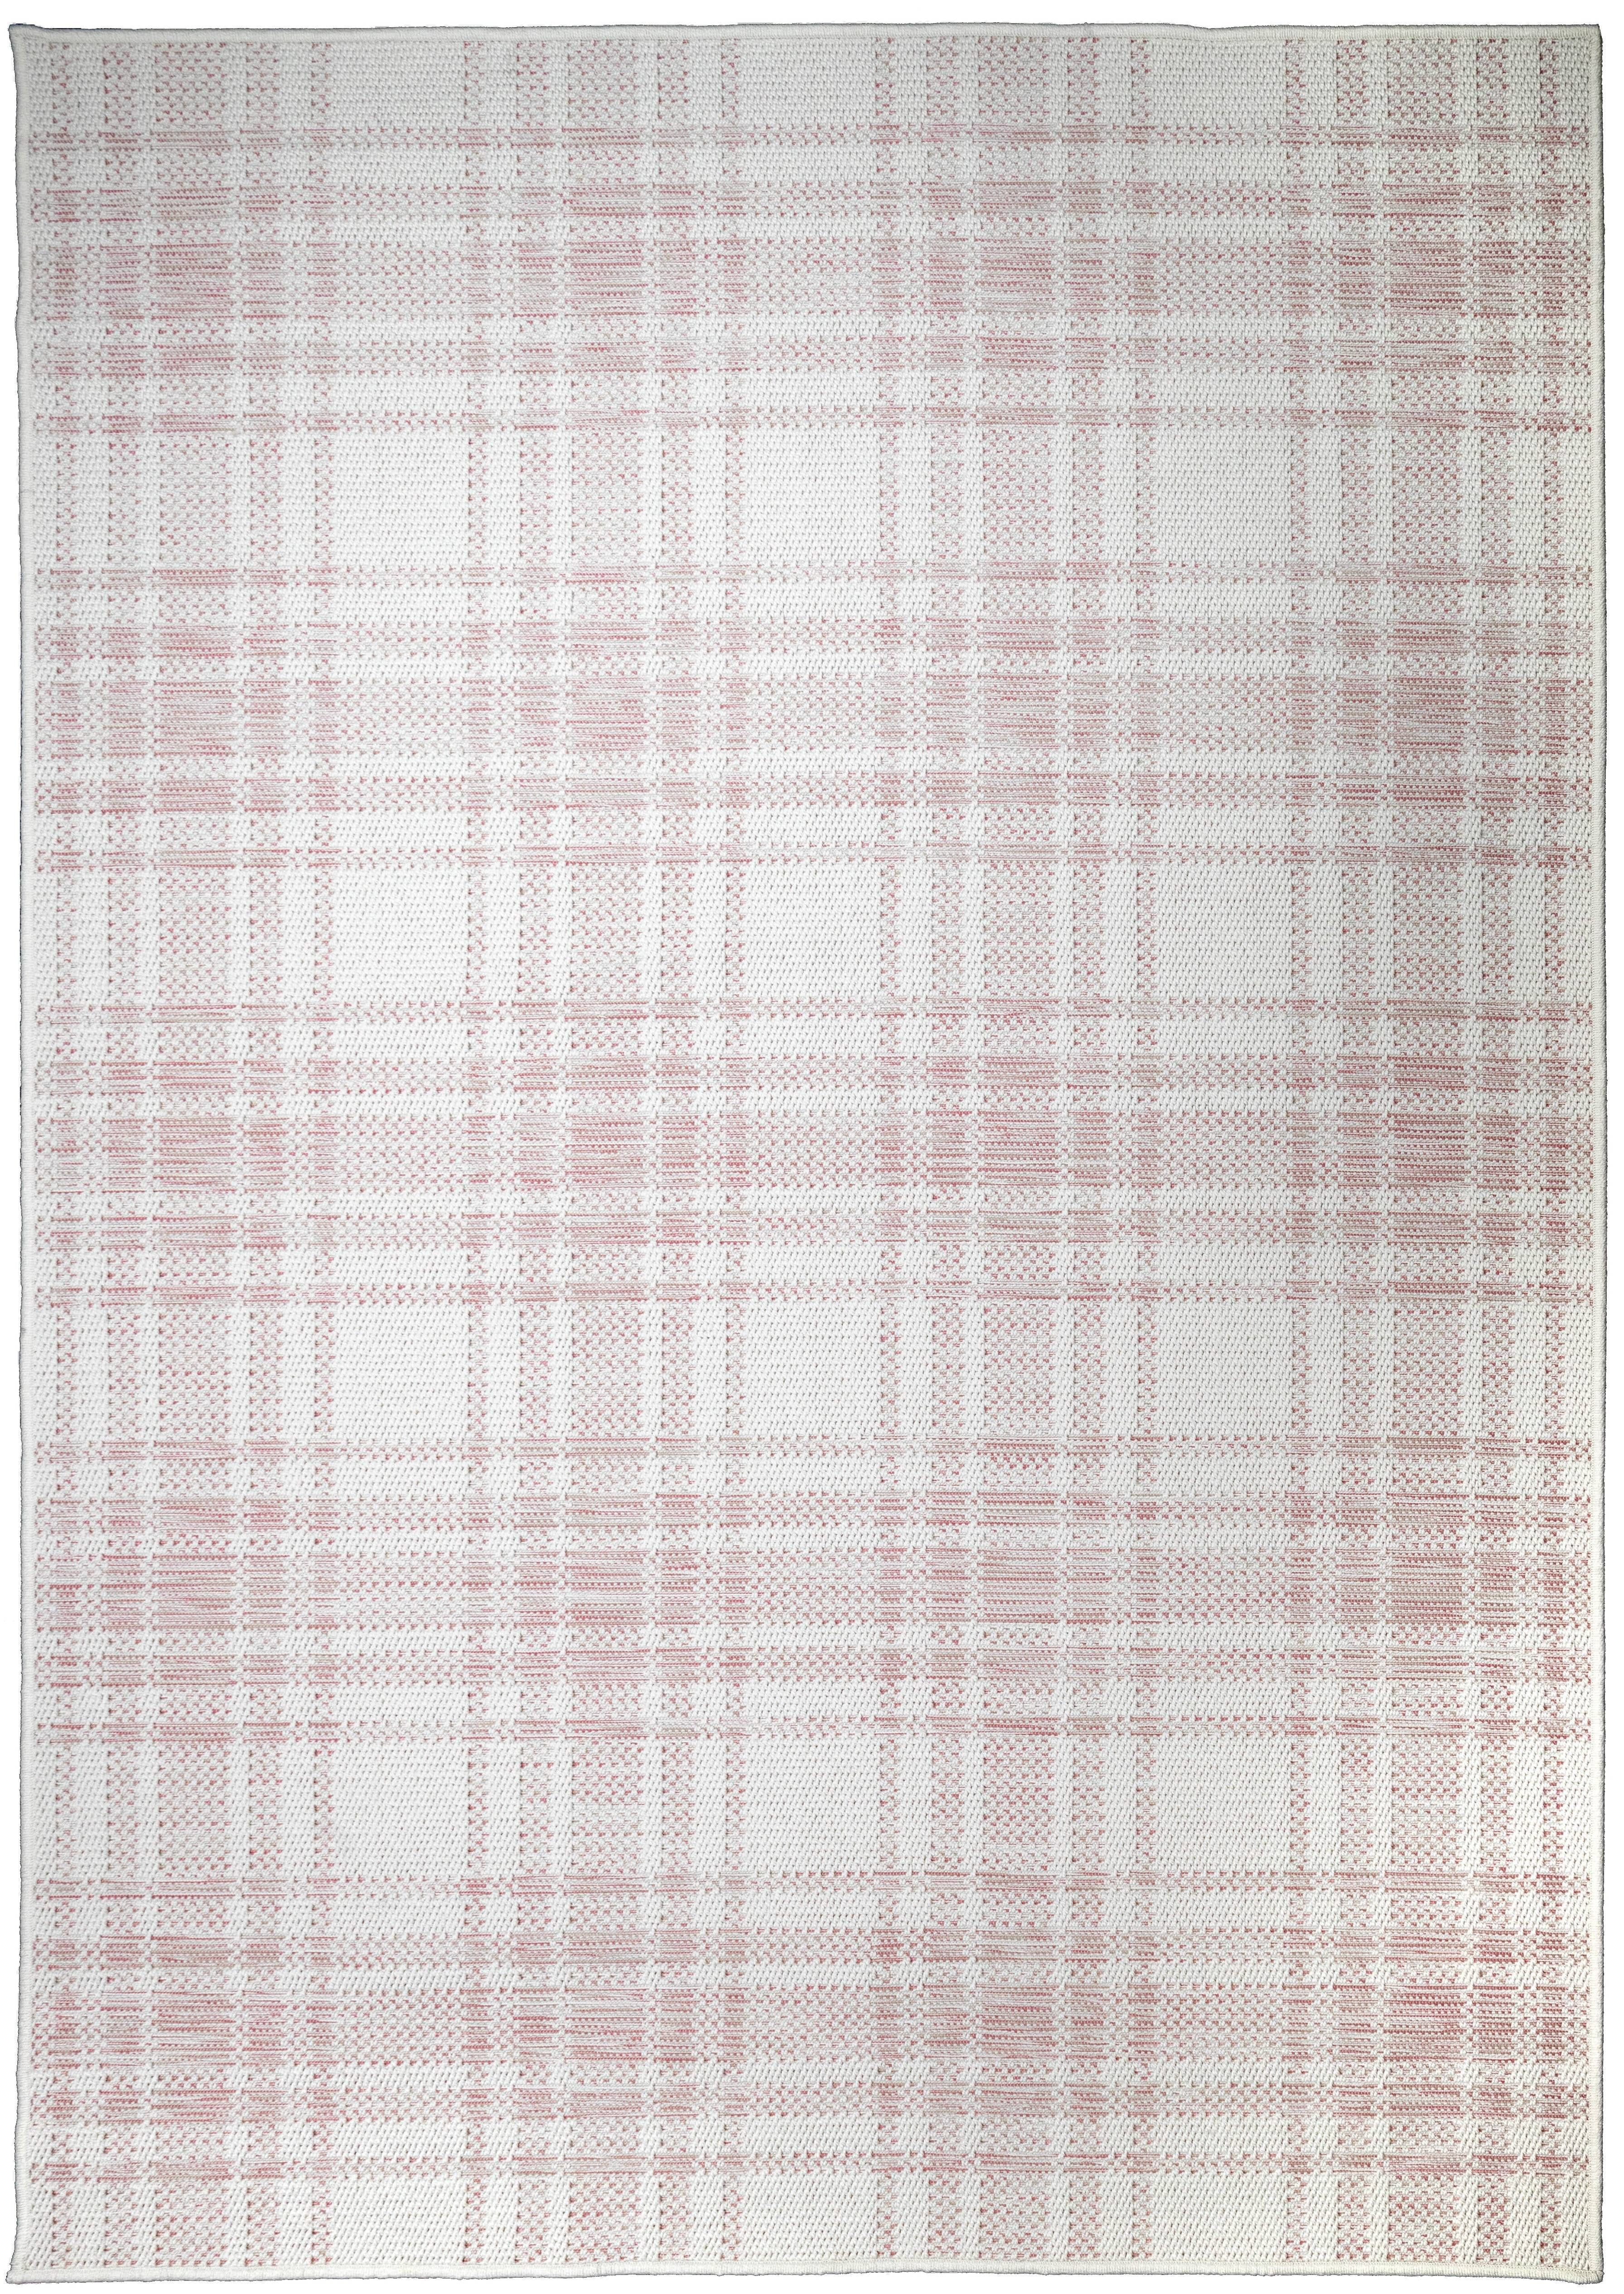 My Texas House Hampshire Plaid Reversible Indoor/ Outdoor Area Rug, Natural Pink, 5' x 7' | Walmart (US)